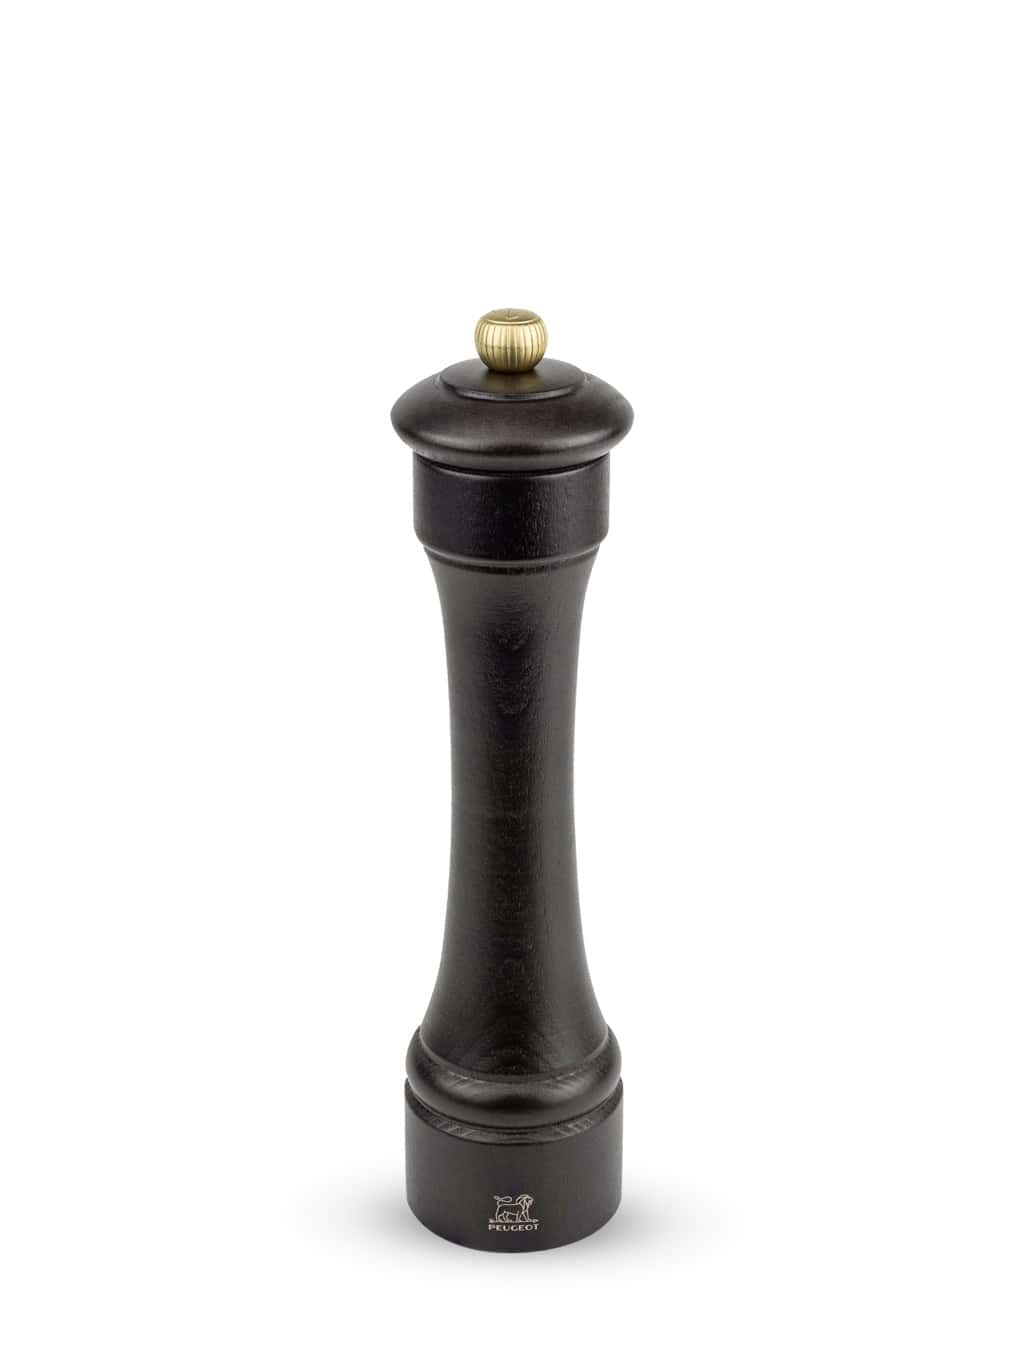 Image of Manual pepper mill in chocolat-coloured wood 22 cm Hostellerie